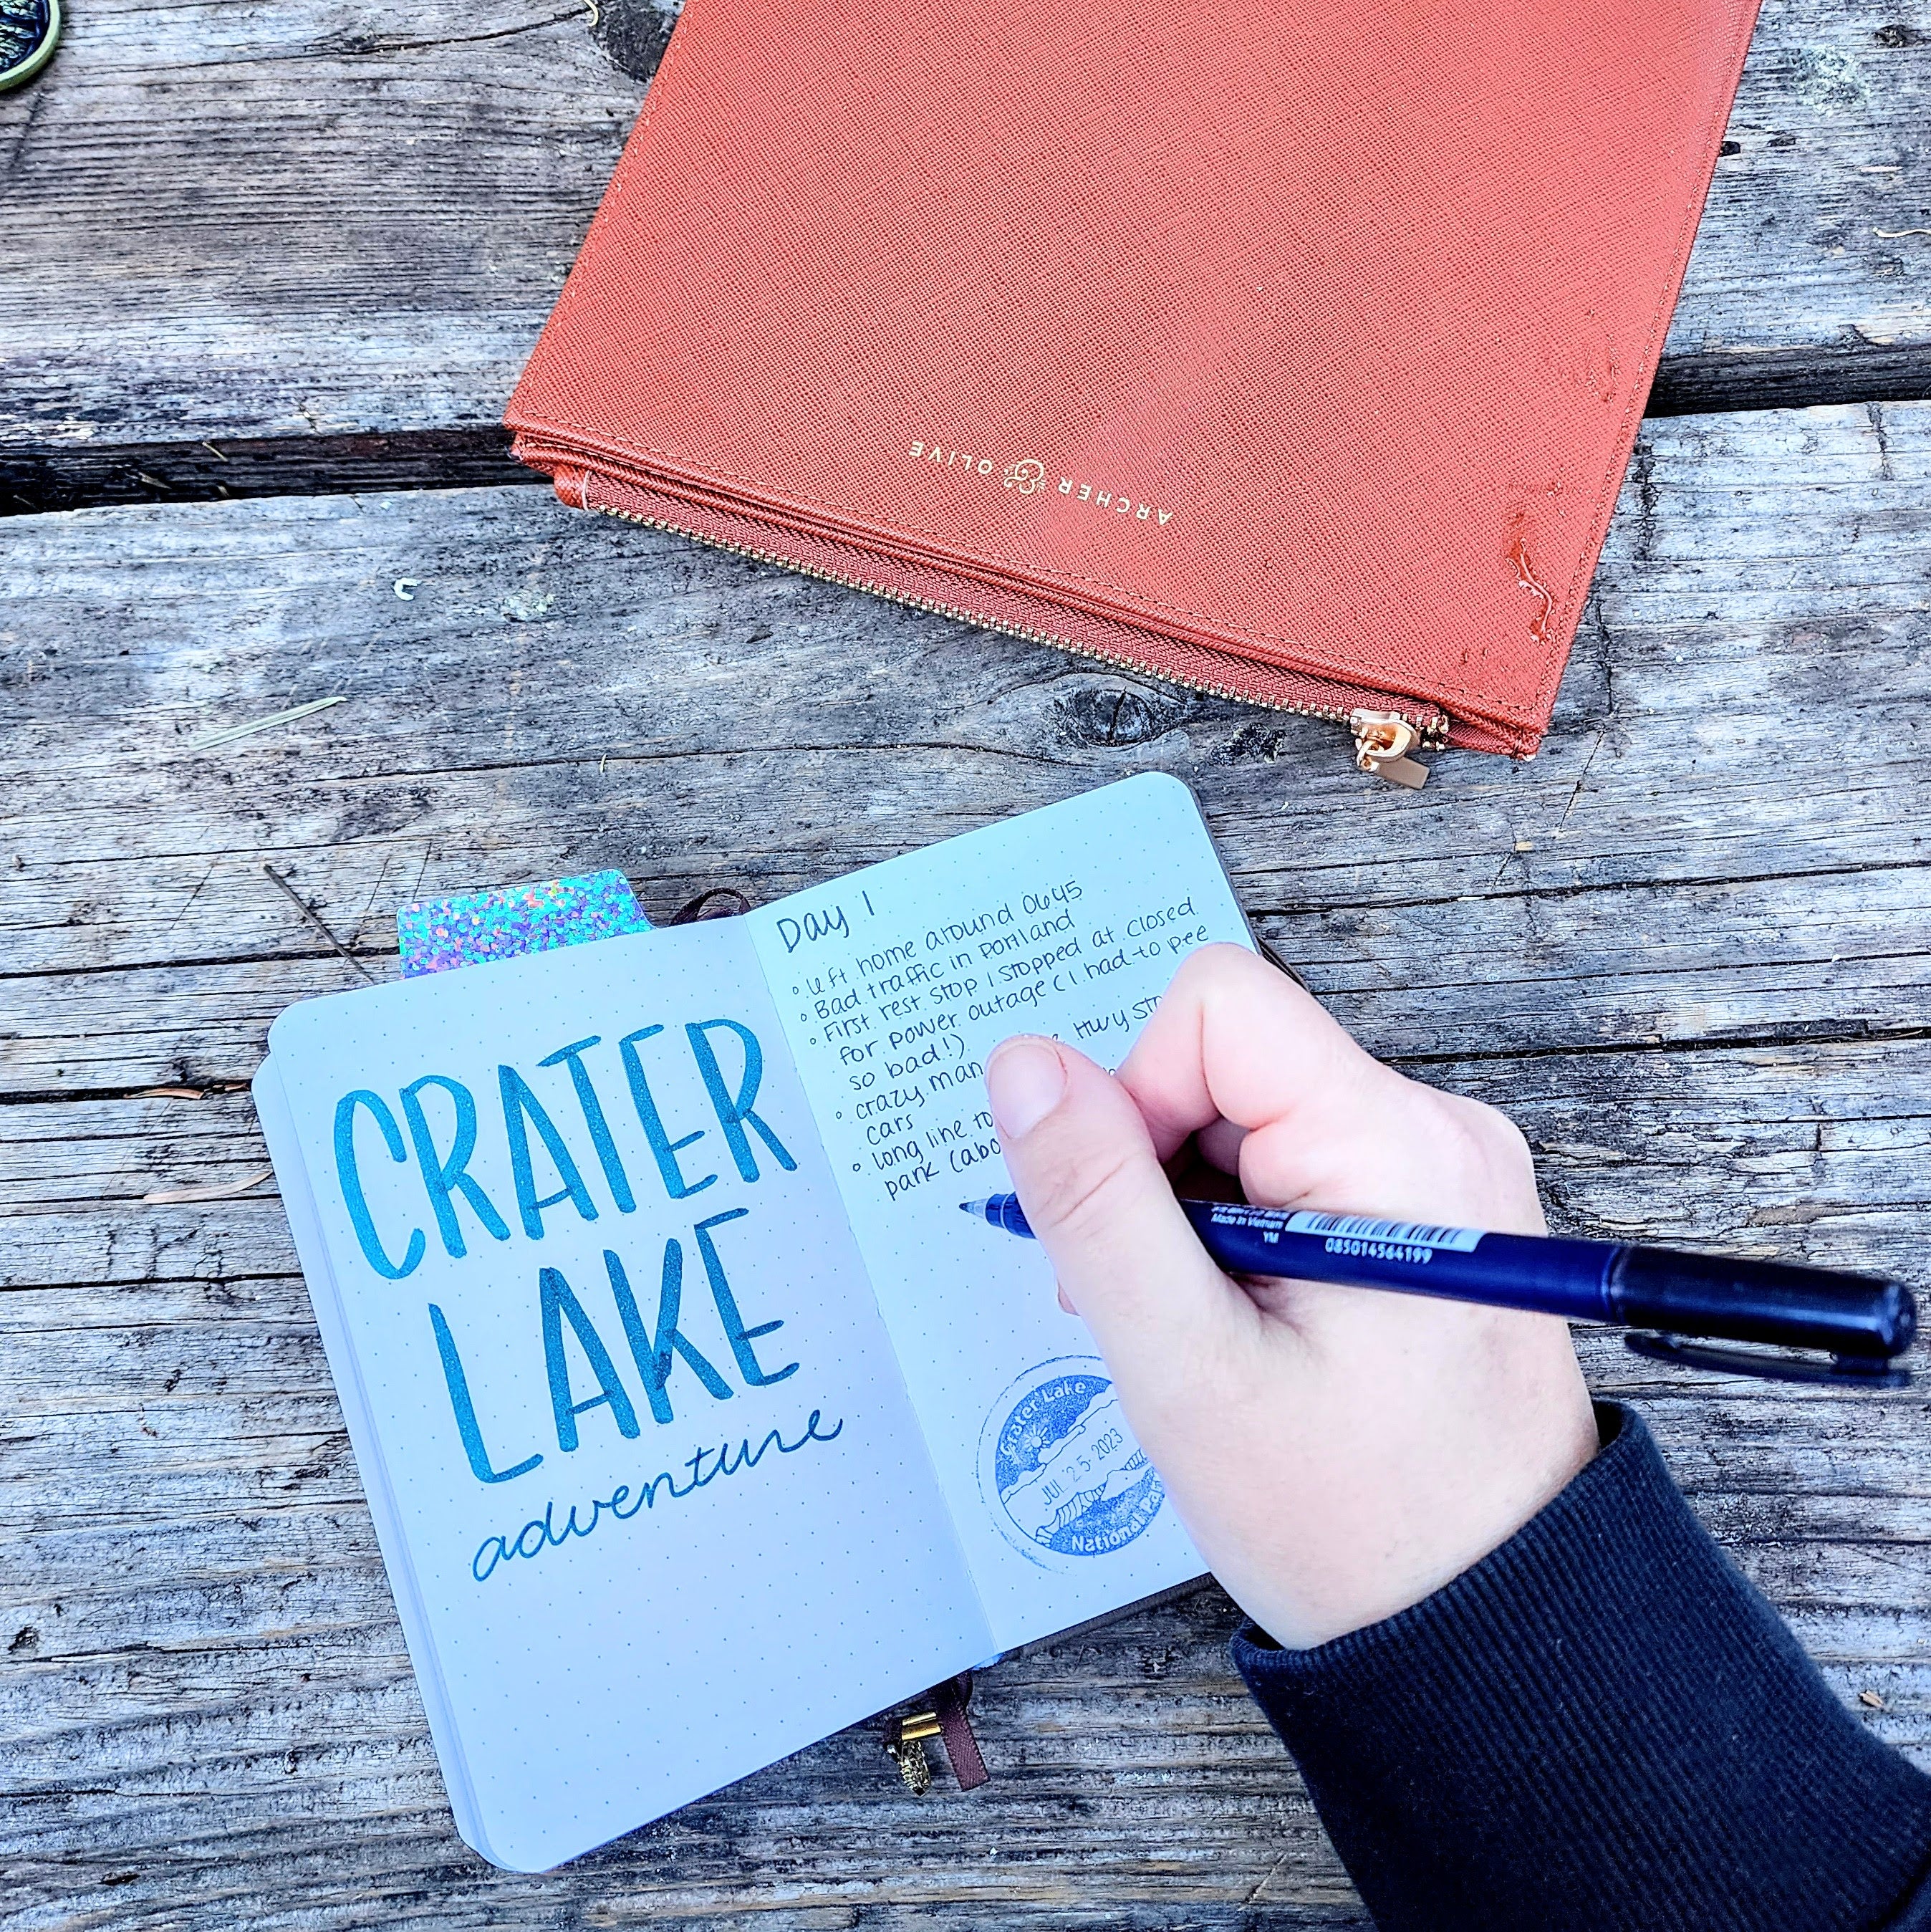 How To Use A Pocket Journal For Documenting While Traveling